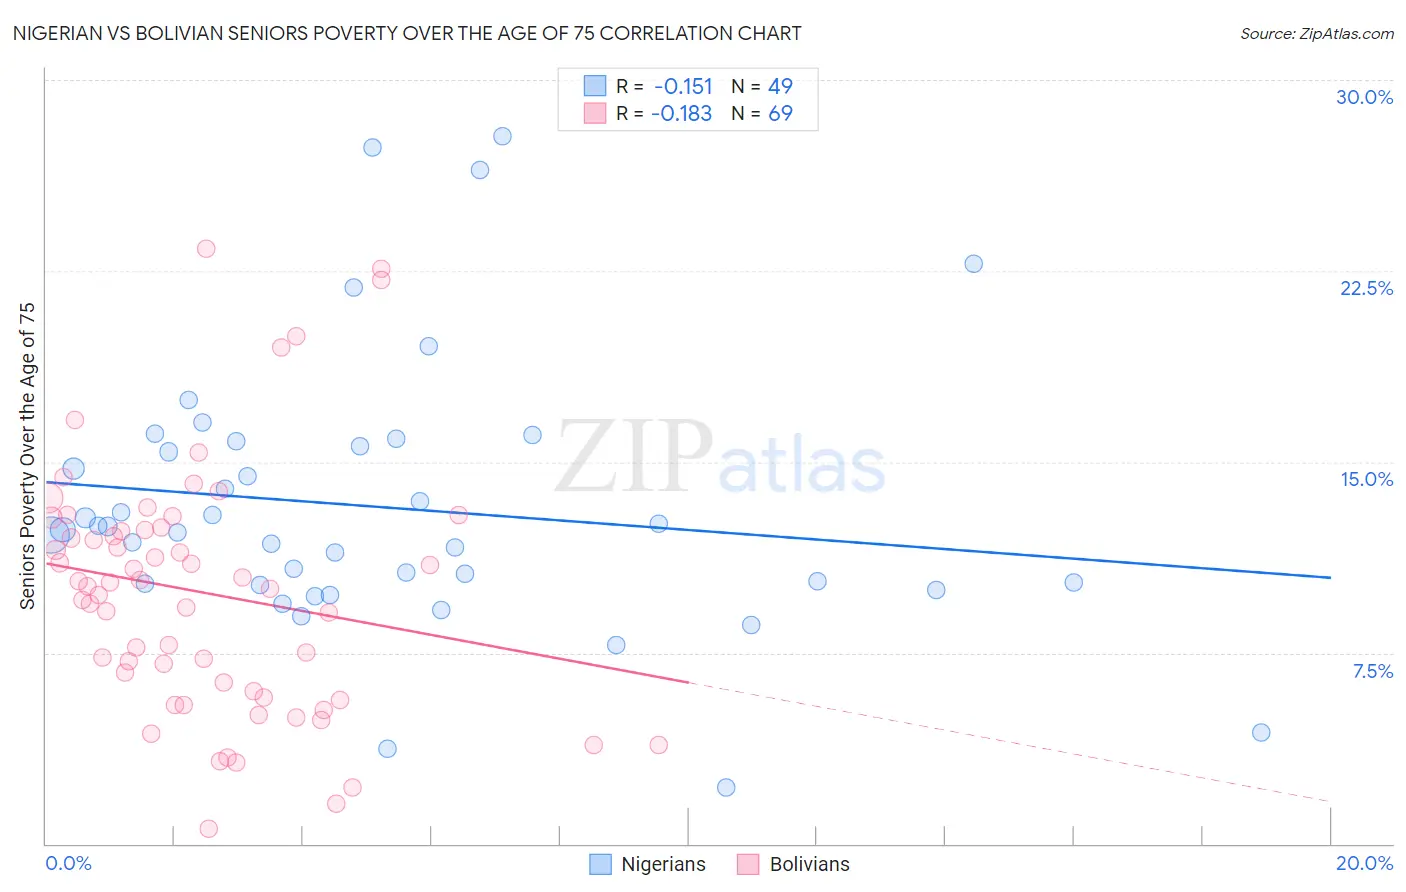 Nigerian vs Bolivian Seniors Poverty Over the Age of 75